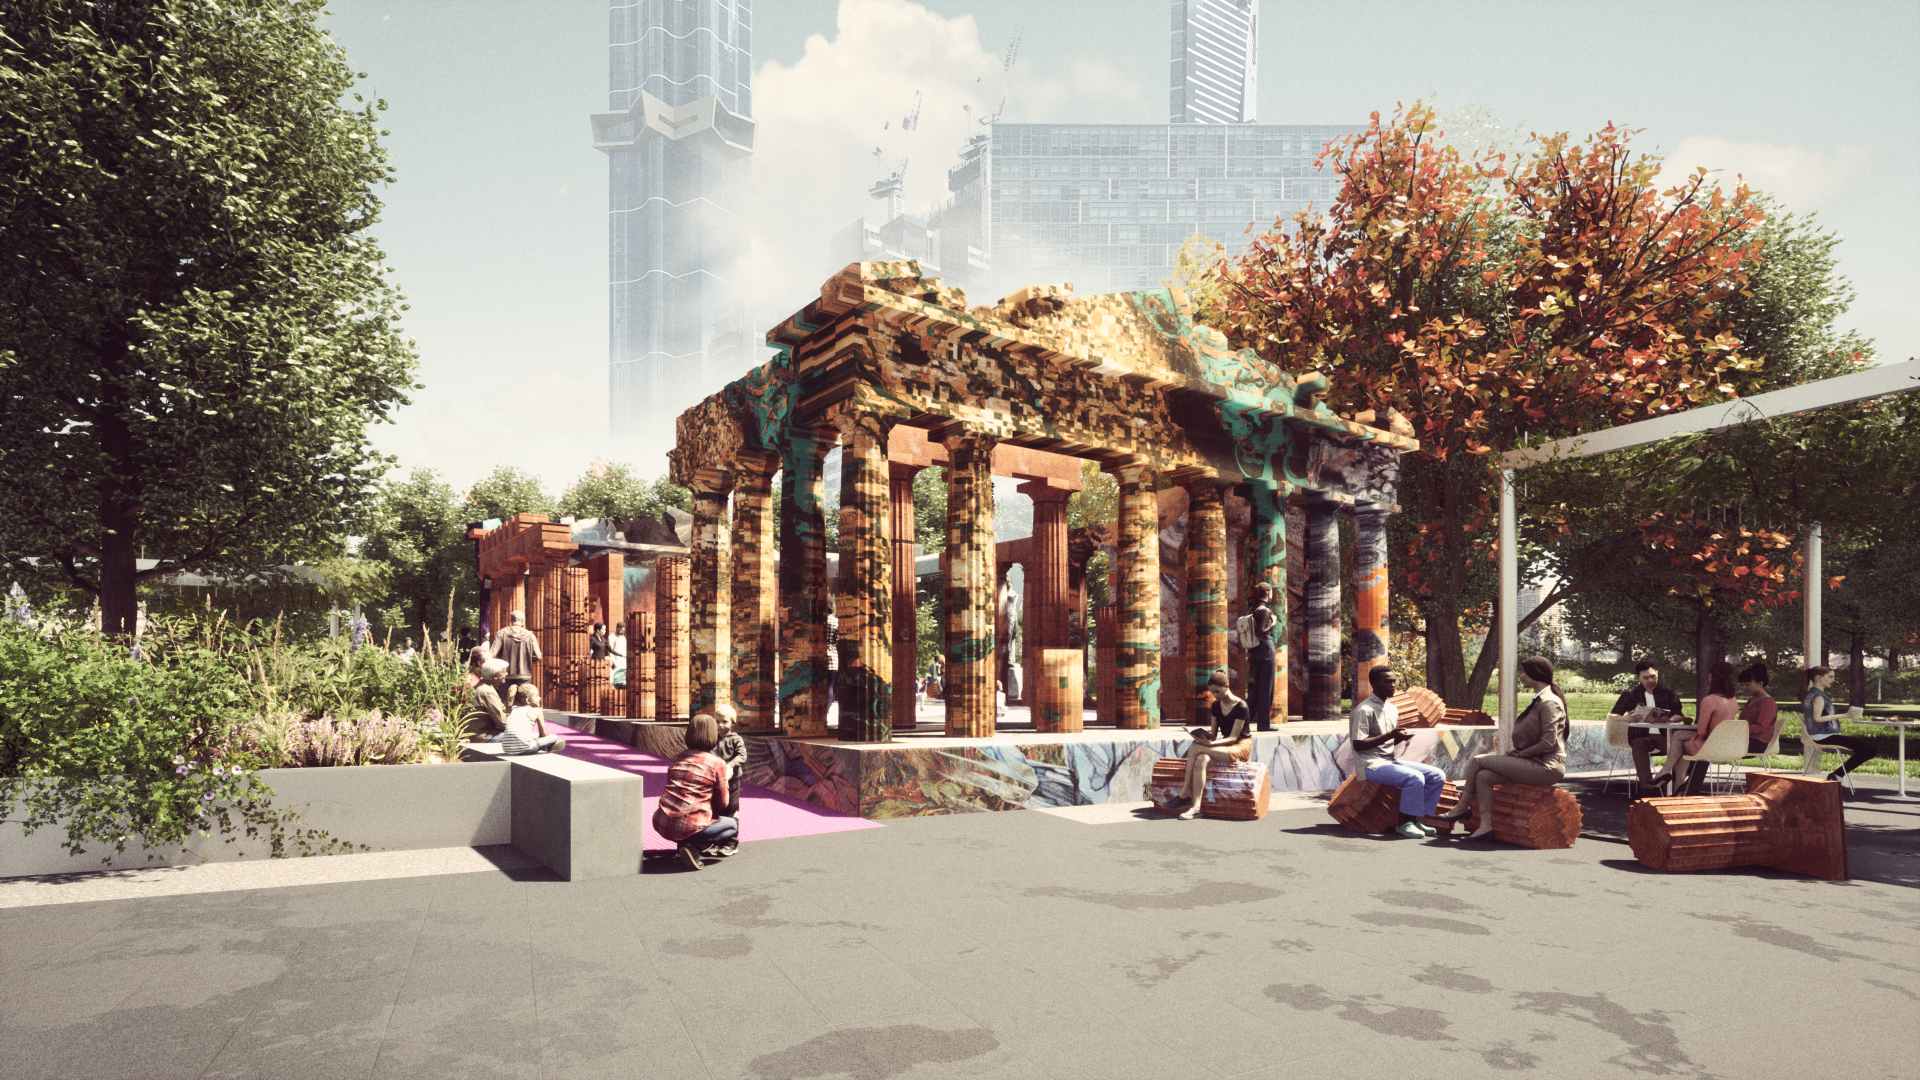 An Art-Clad Replica of Greece's Parthenon Will Pop Up Outside the NGV for Summer